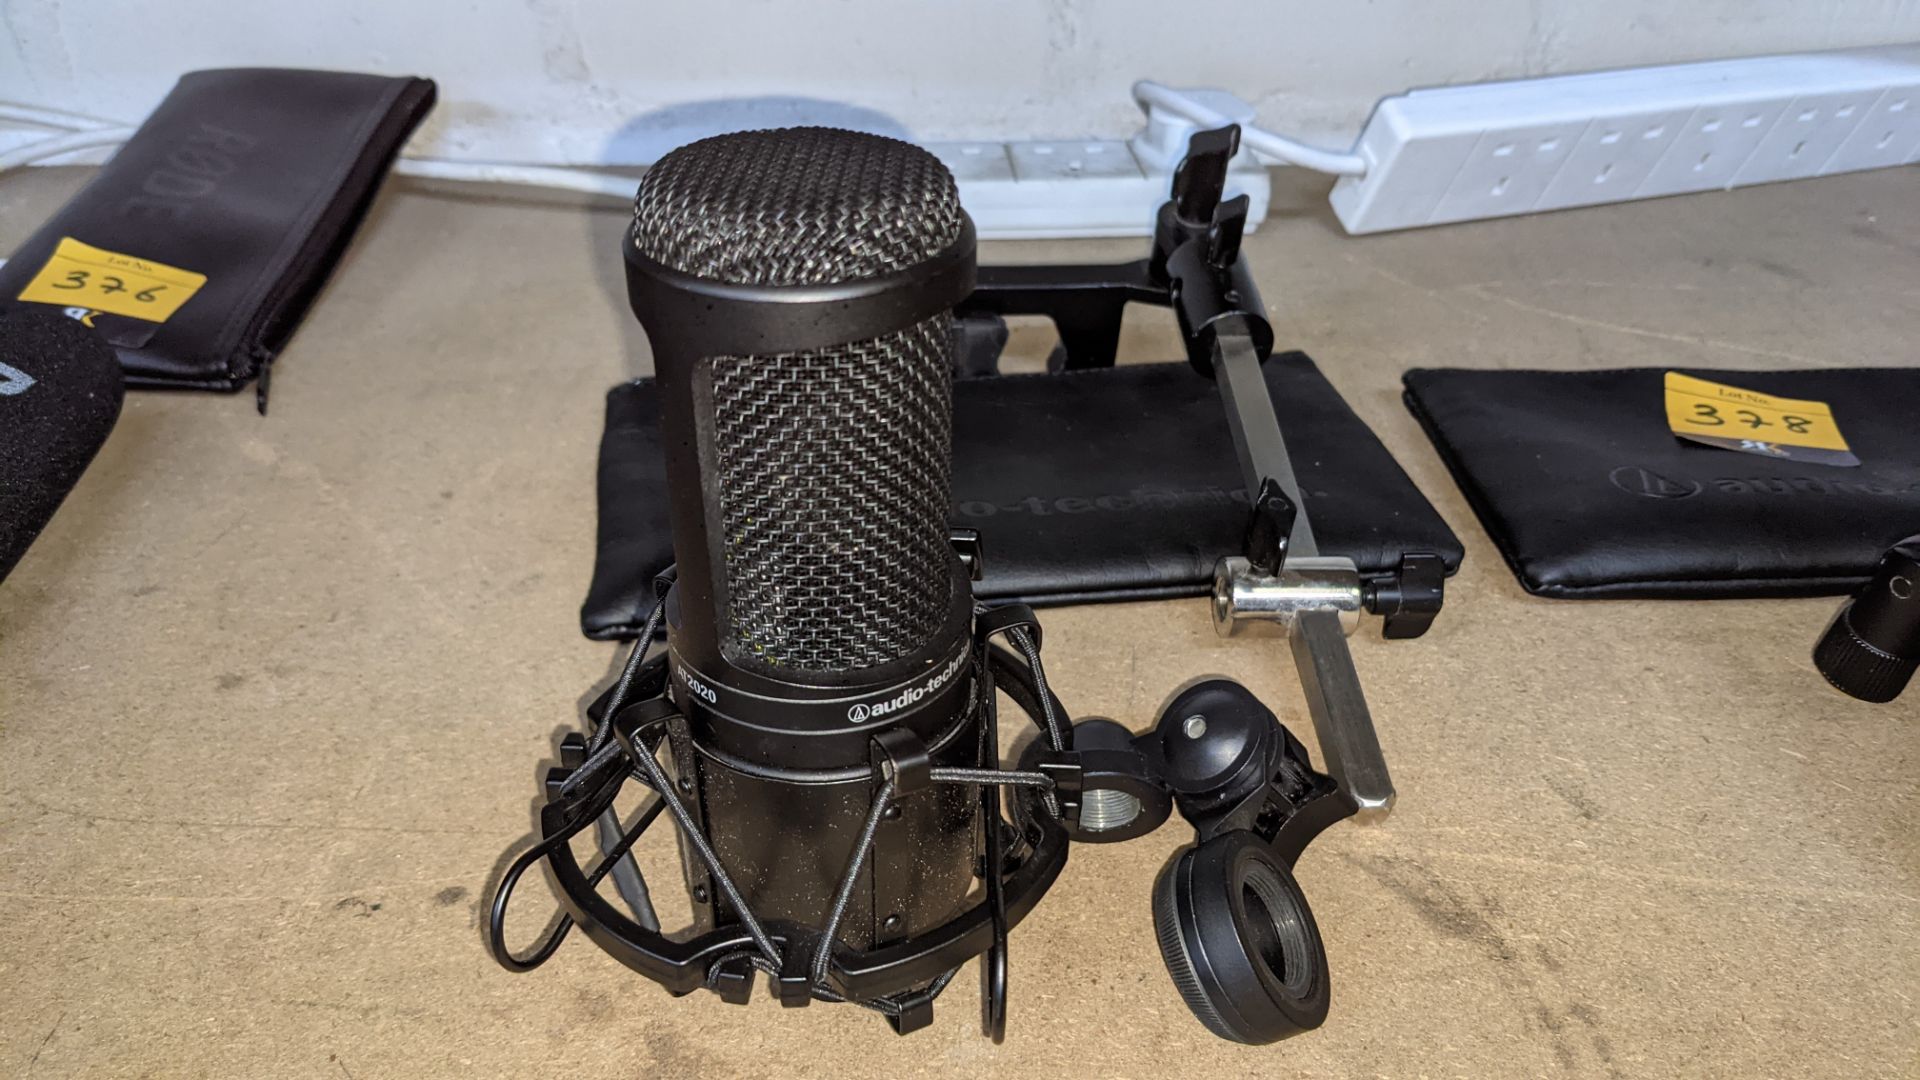 Audio Technica AT2020 P48 Cardioid condenser microphone with case & ancillaries as pictured - Image 2 of 8